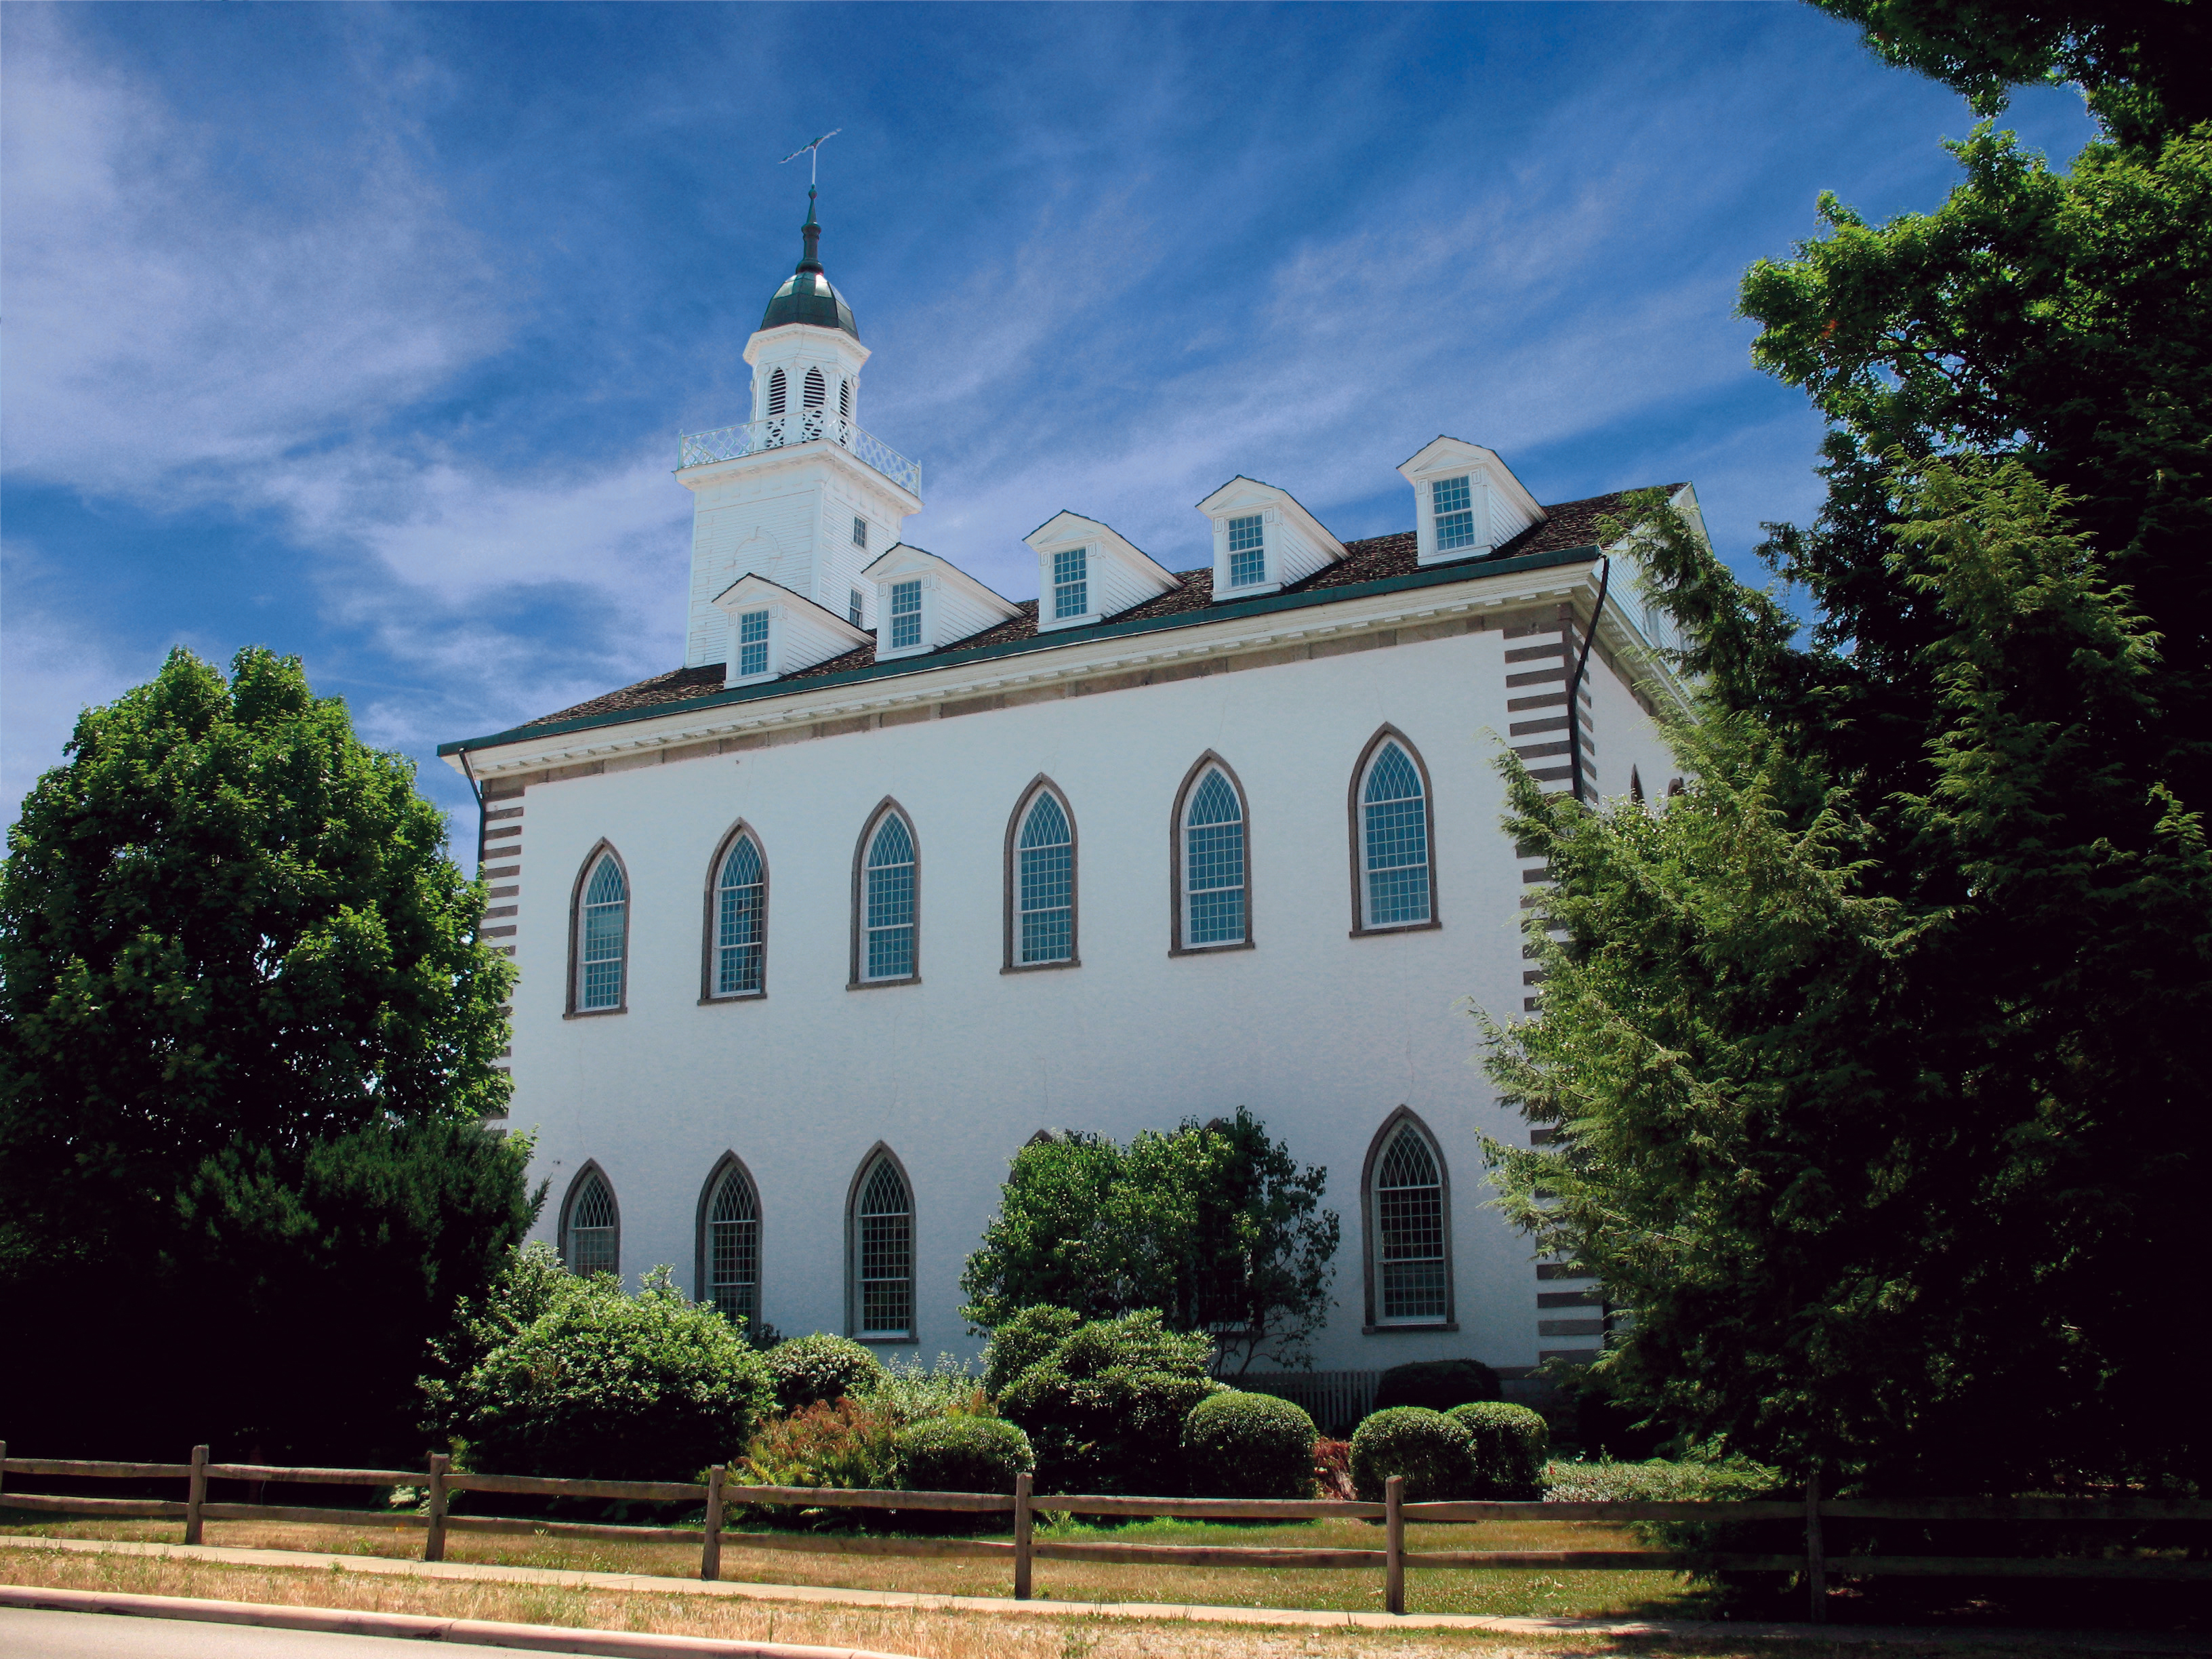 The Kirtland Temple seen from the side between two large green trees, with a small wooden fence running around the grounds.